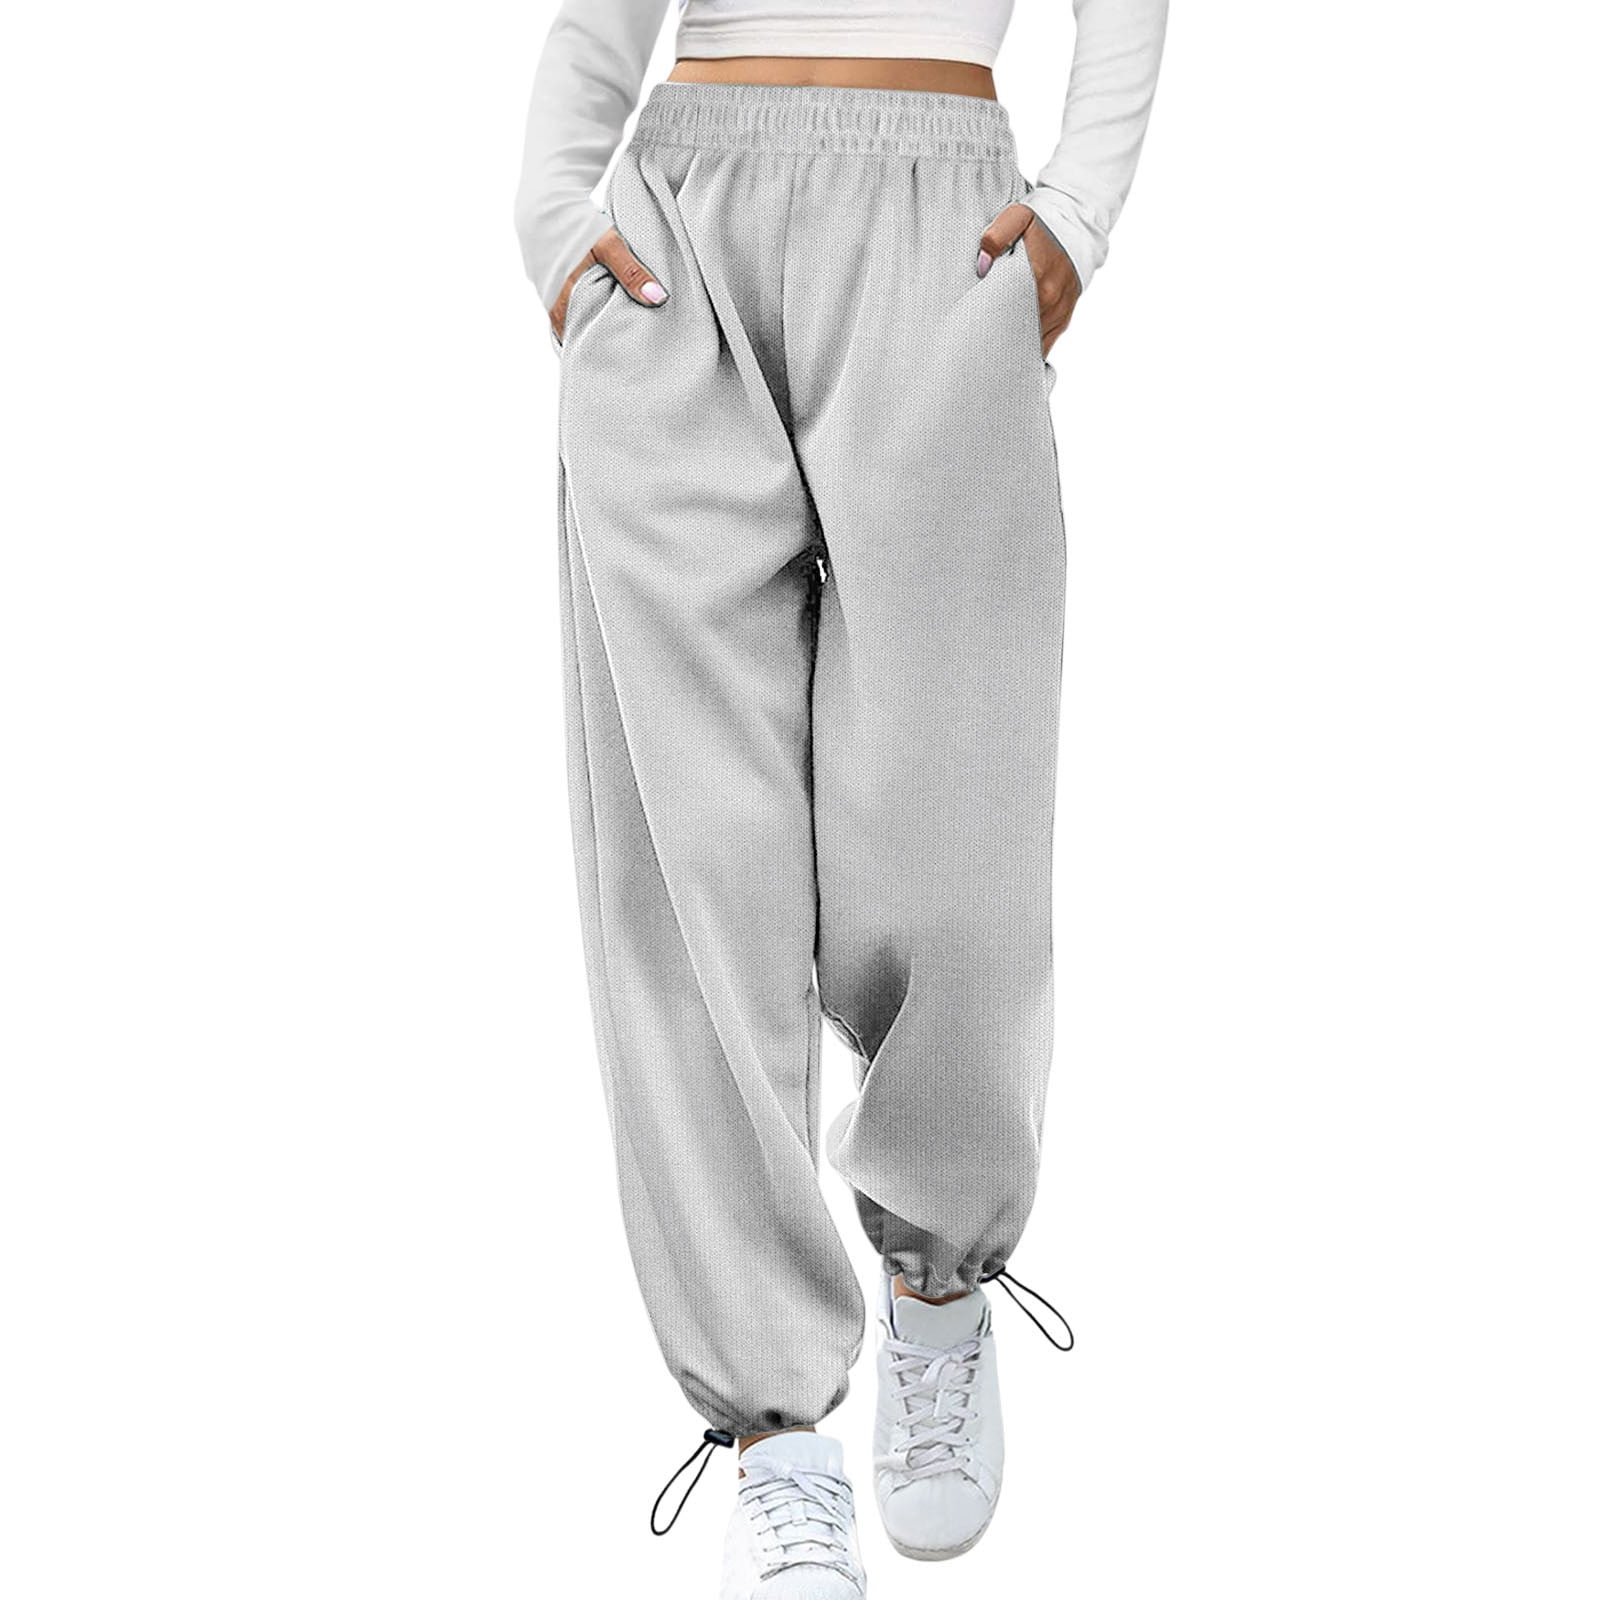 Wide Leg Sweatpants Women Short Wide Leg Baggy High Waisted Joggers  Trousers With Pockets Drawstring Track Pants